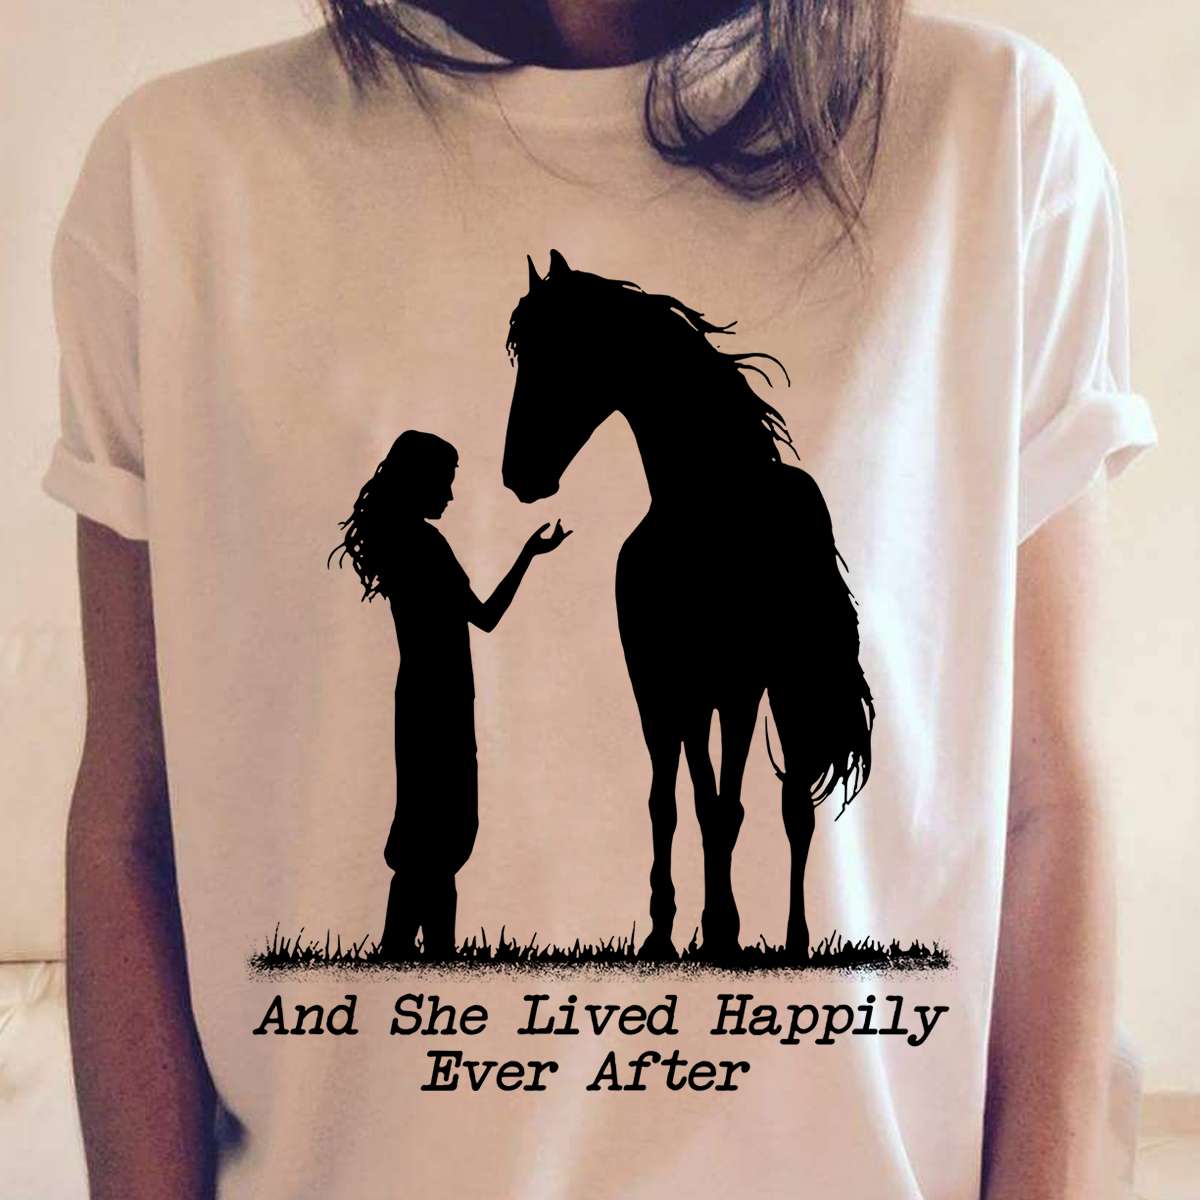 And she lived happily ever after - Girl loves horse, happy with horses